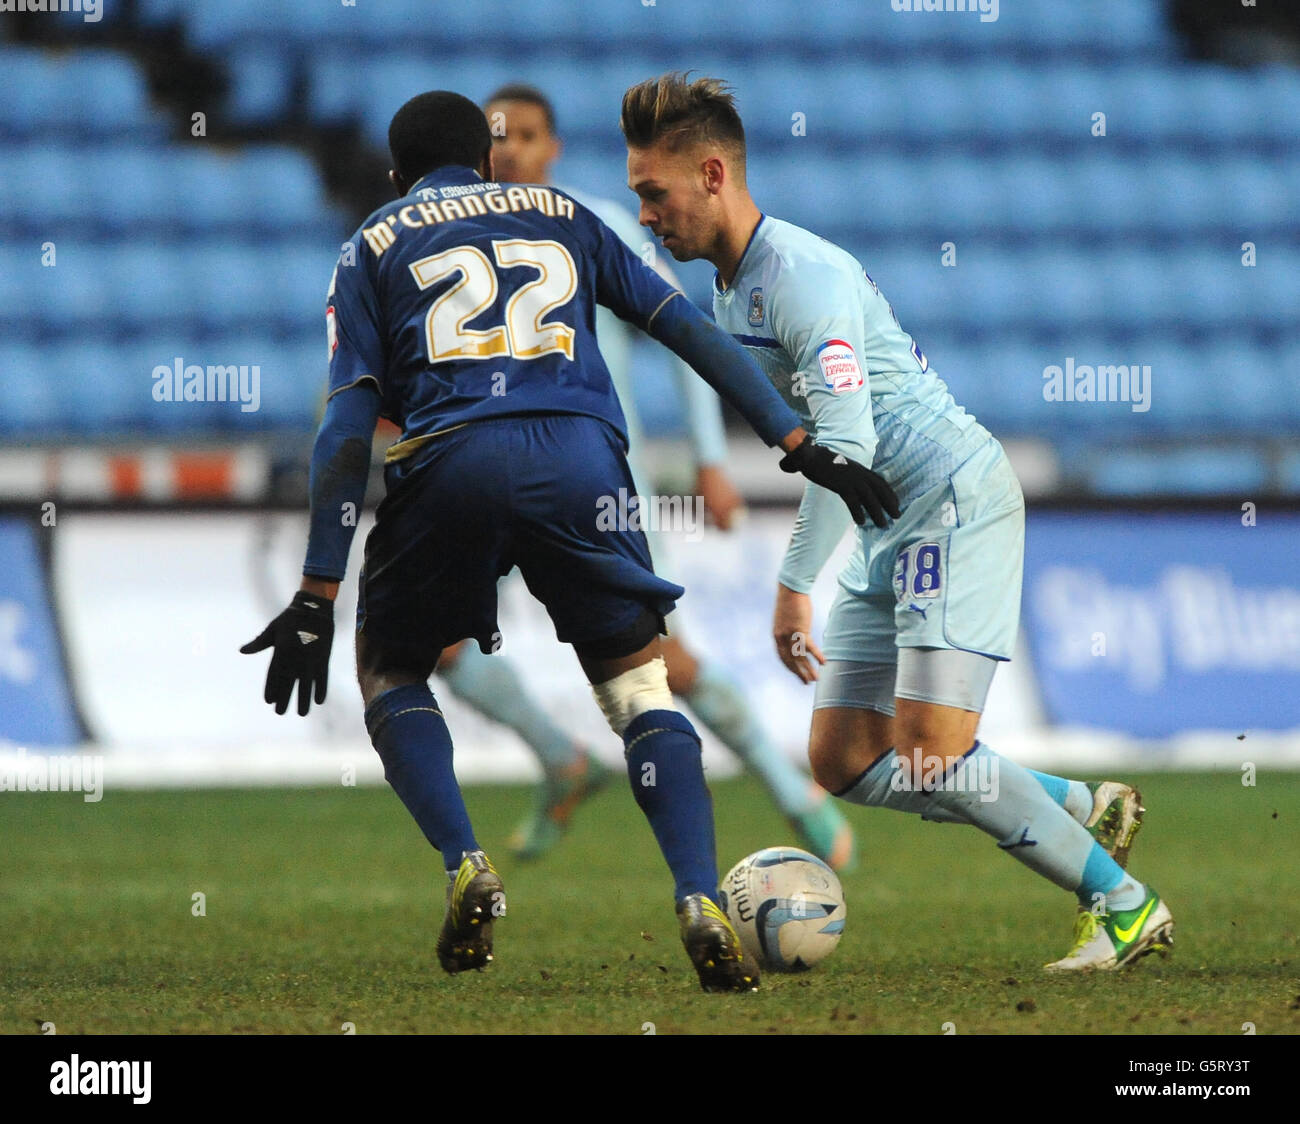 Coventry City's James Bailey (right) and Oldham Athletic's Youssouf M'Changama (left) during the npower League One match at the Ricoh Arena, Coventry. Stock Photo